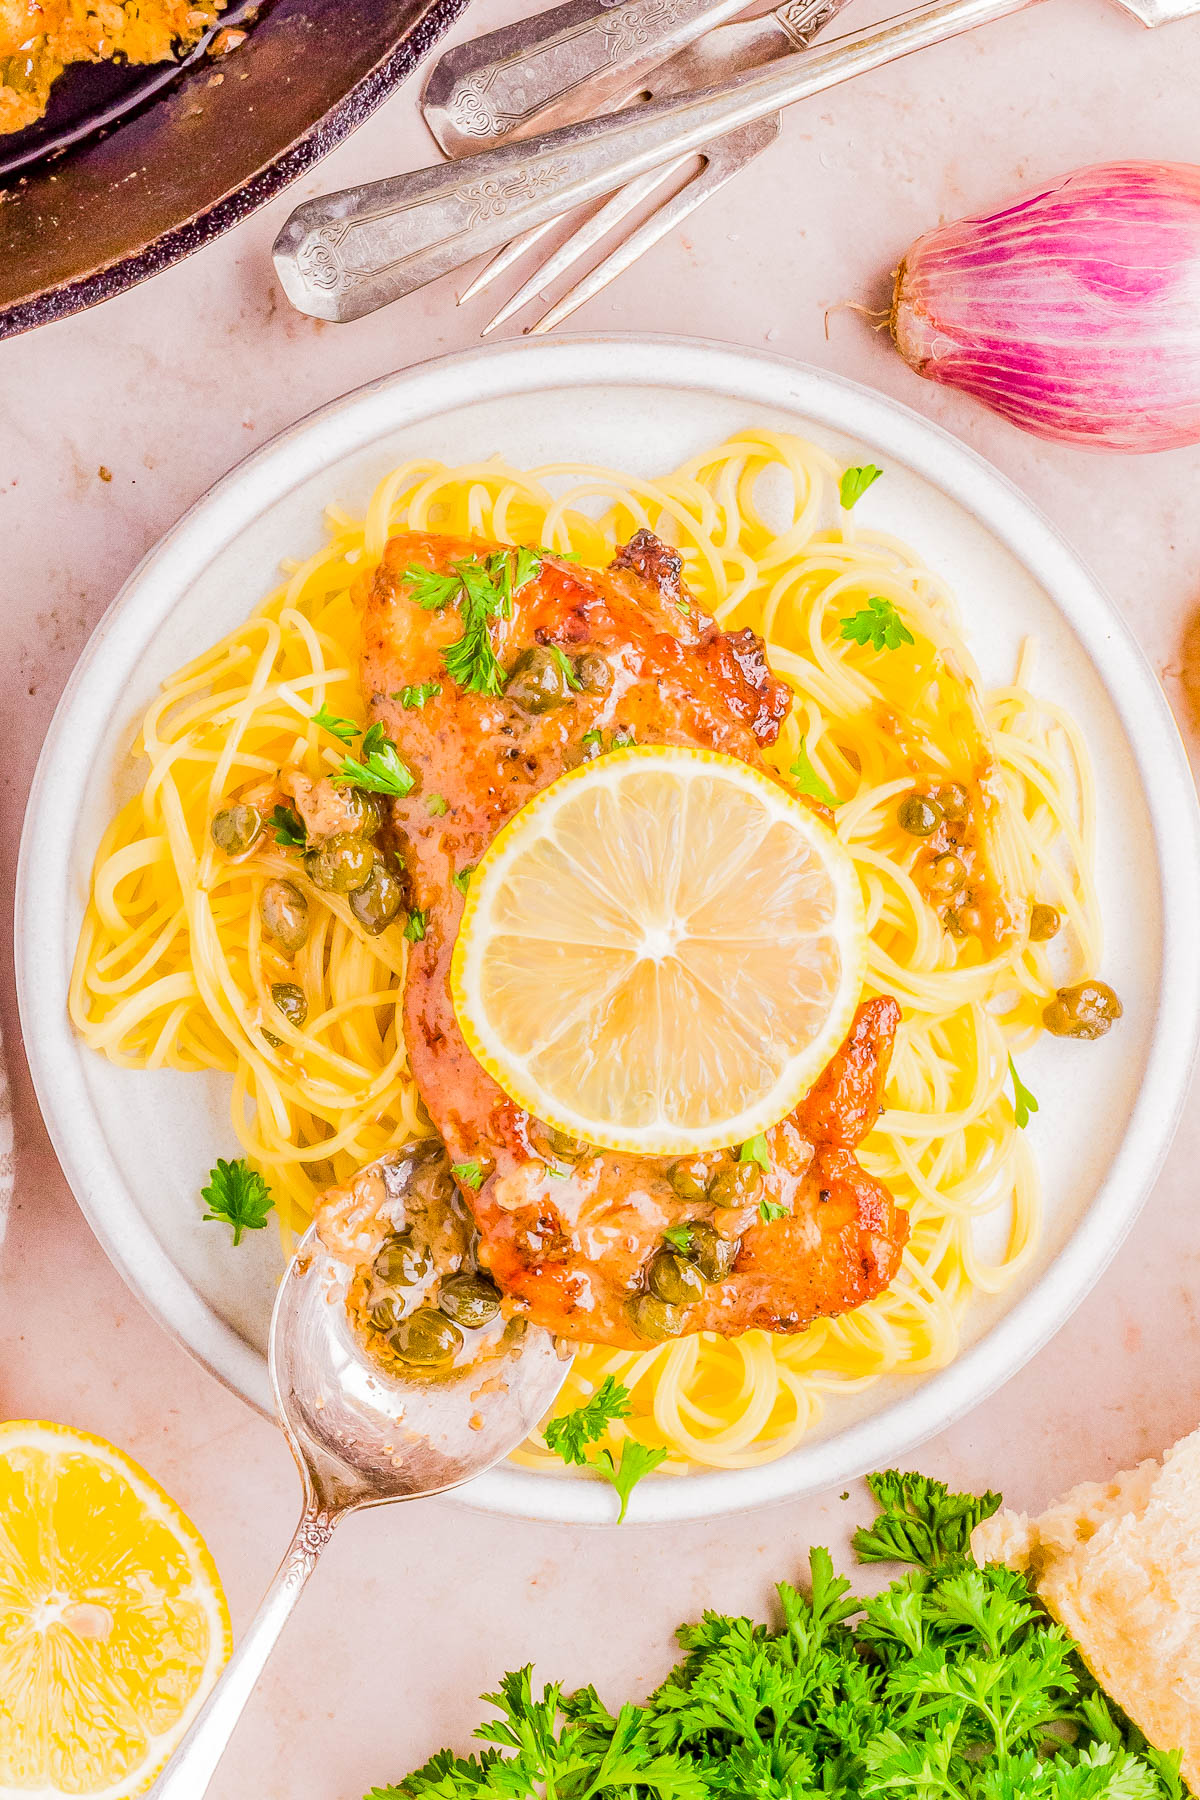 A plate of spaghetti with a lemon-caper sauce and a slice of lemon on top, served with a side of bread and fresh herbs.